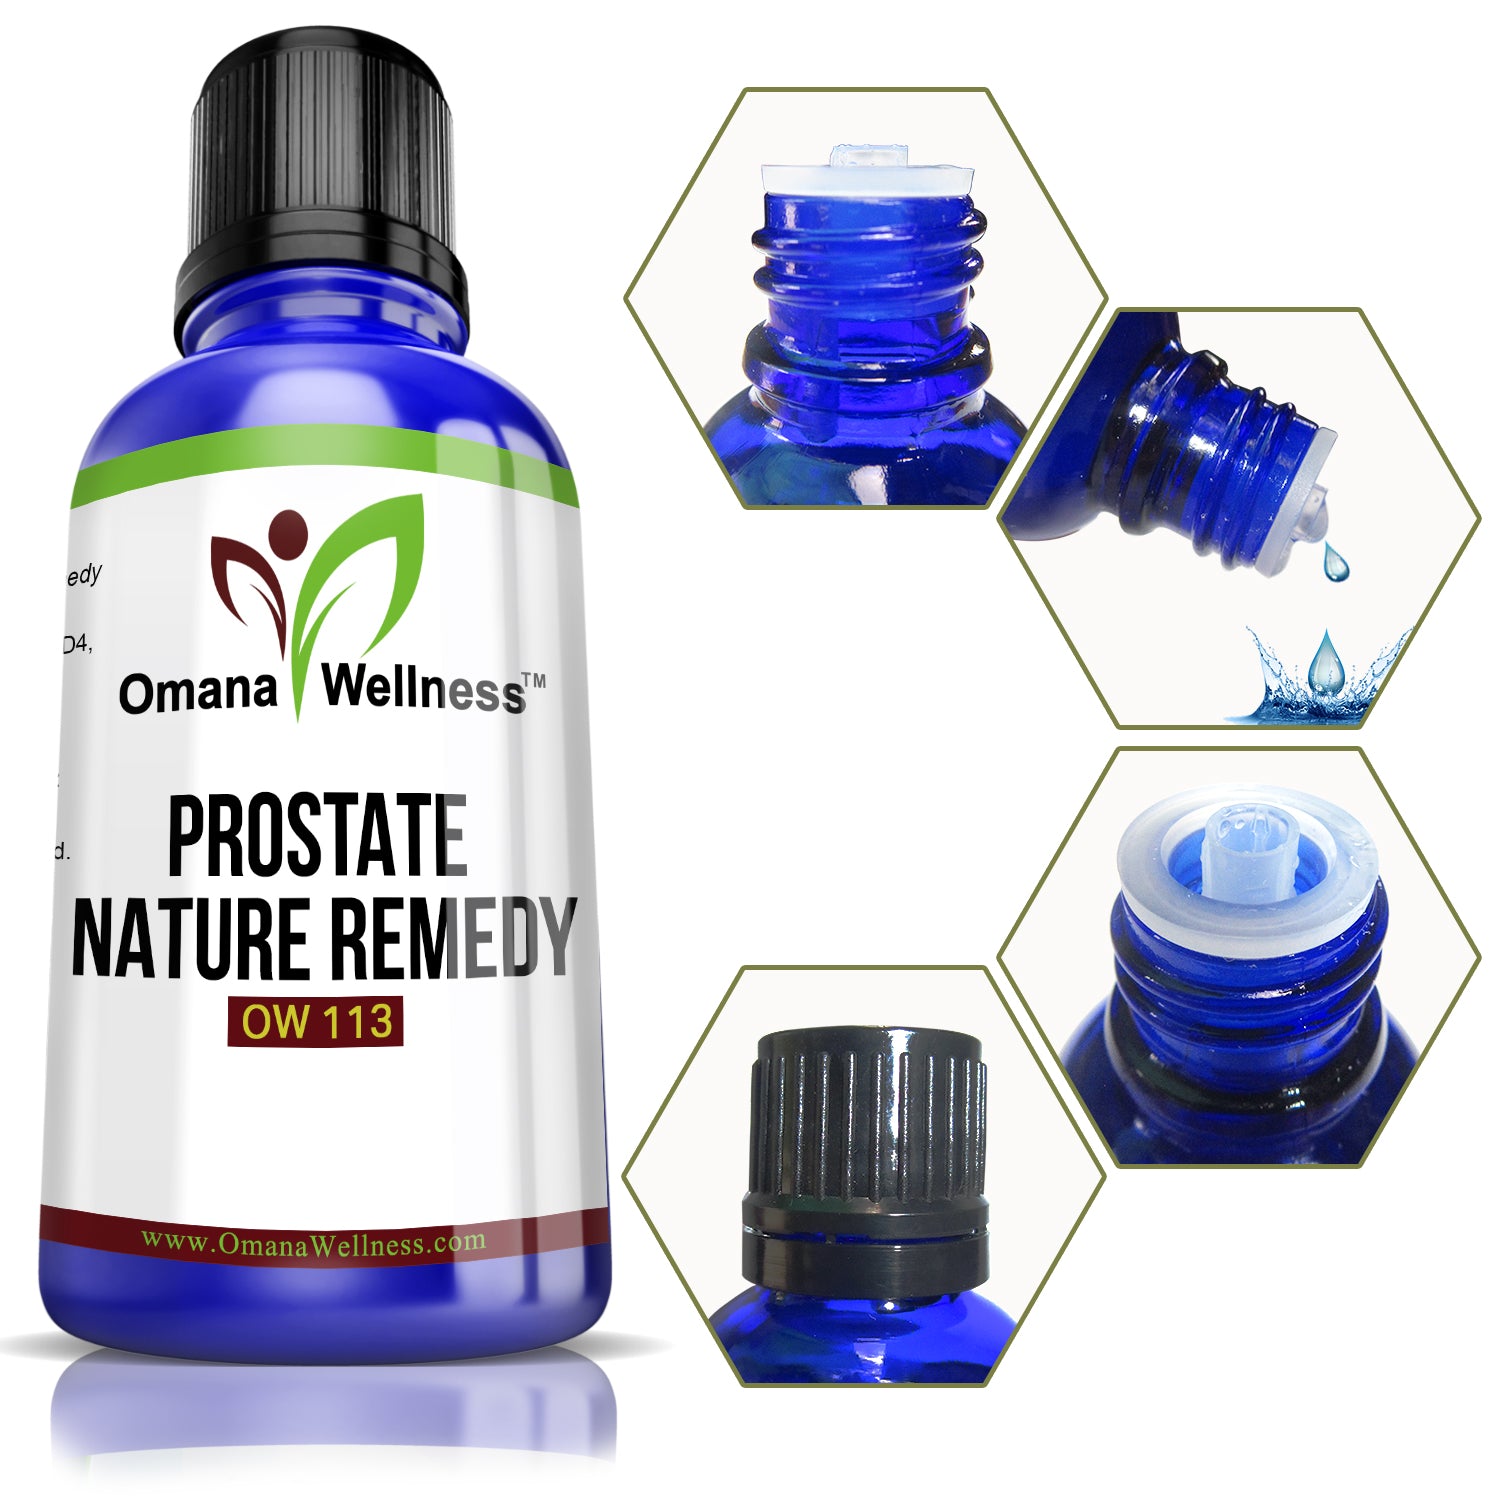 PROSTATE NATURE REMEDY OW113